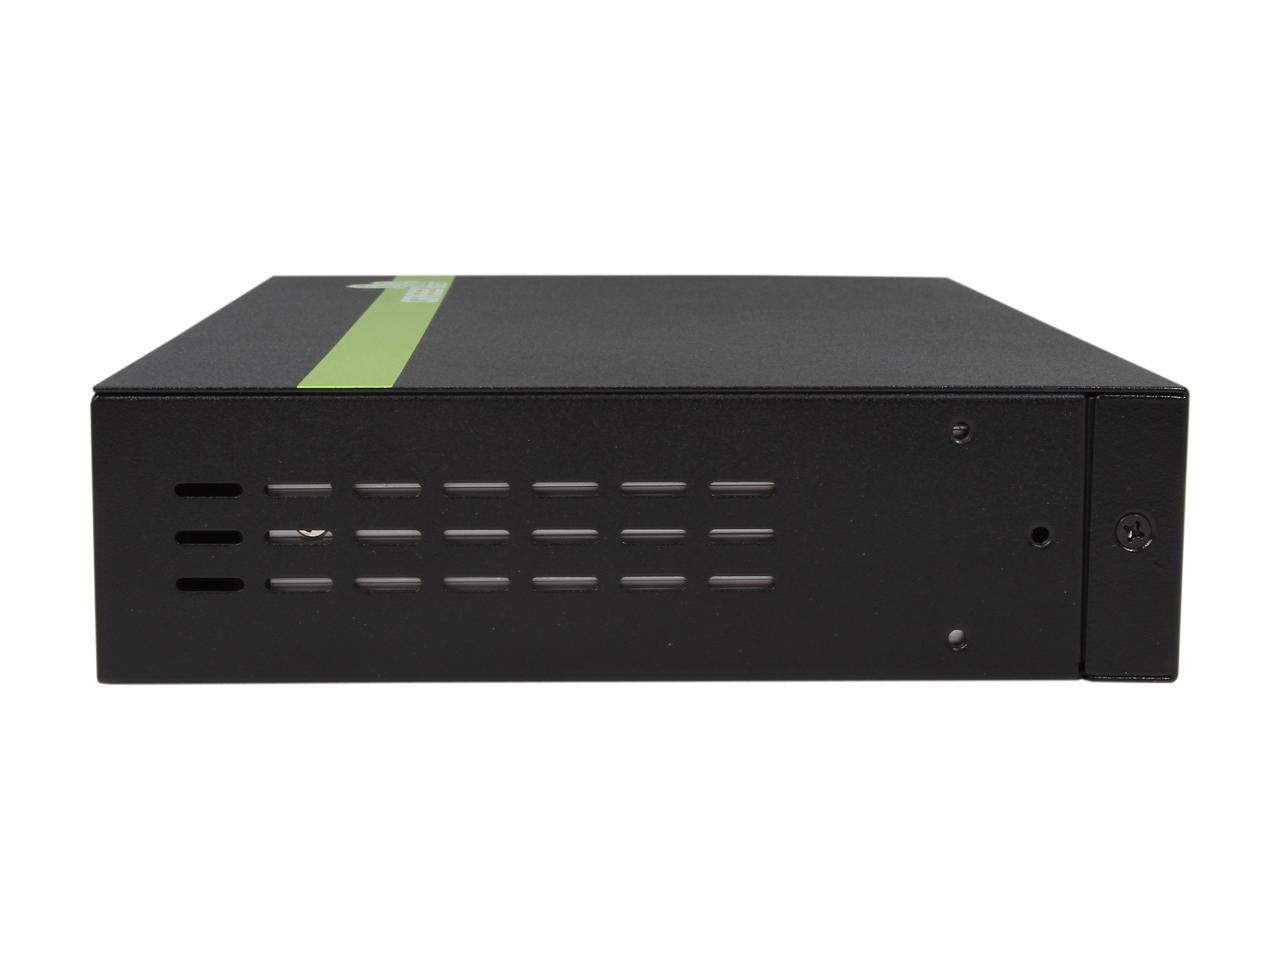 TRENDnet TPE-T80H Switches 4 to 10 Ports 8-Port PoE+ Switch. Limited Life Time Warranty